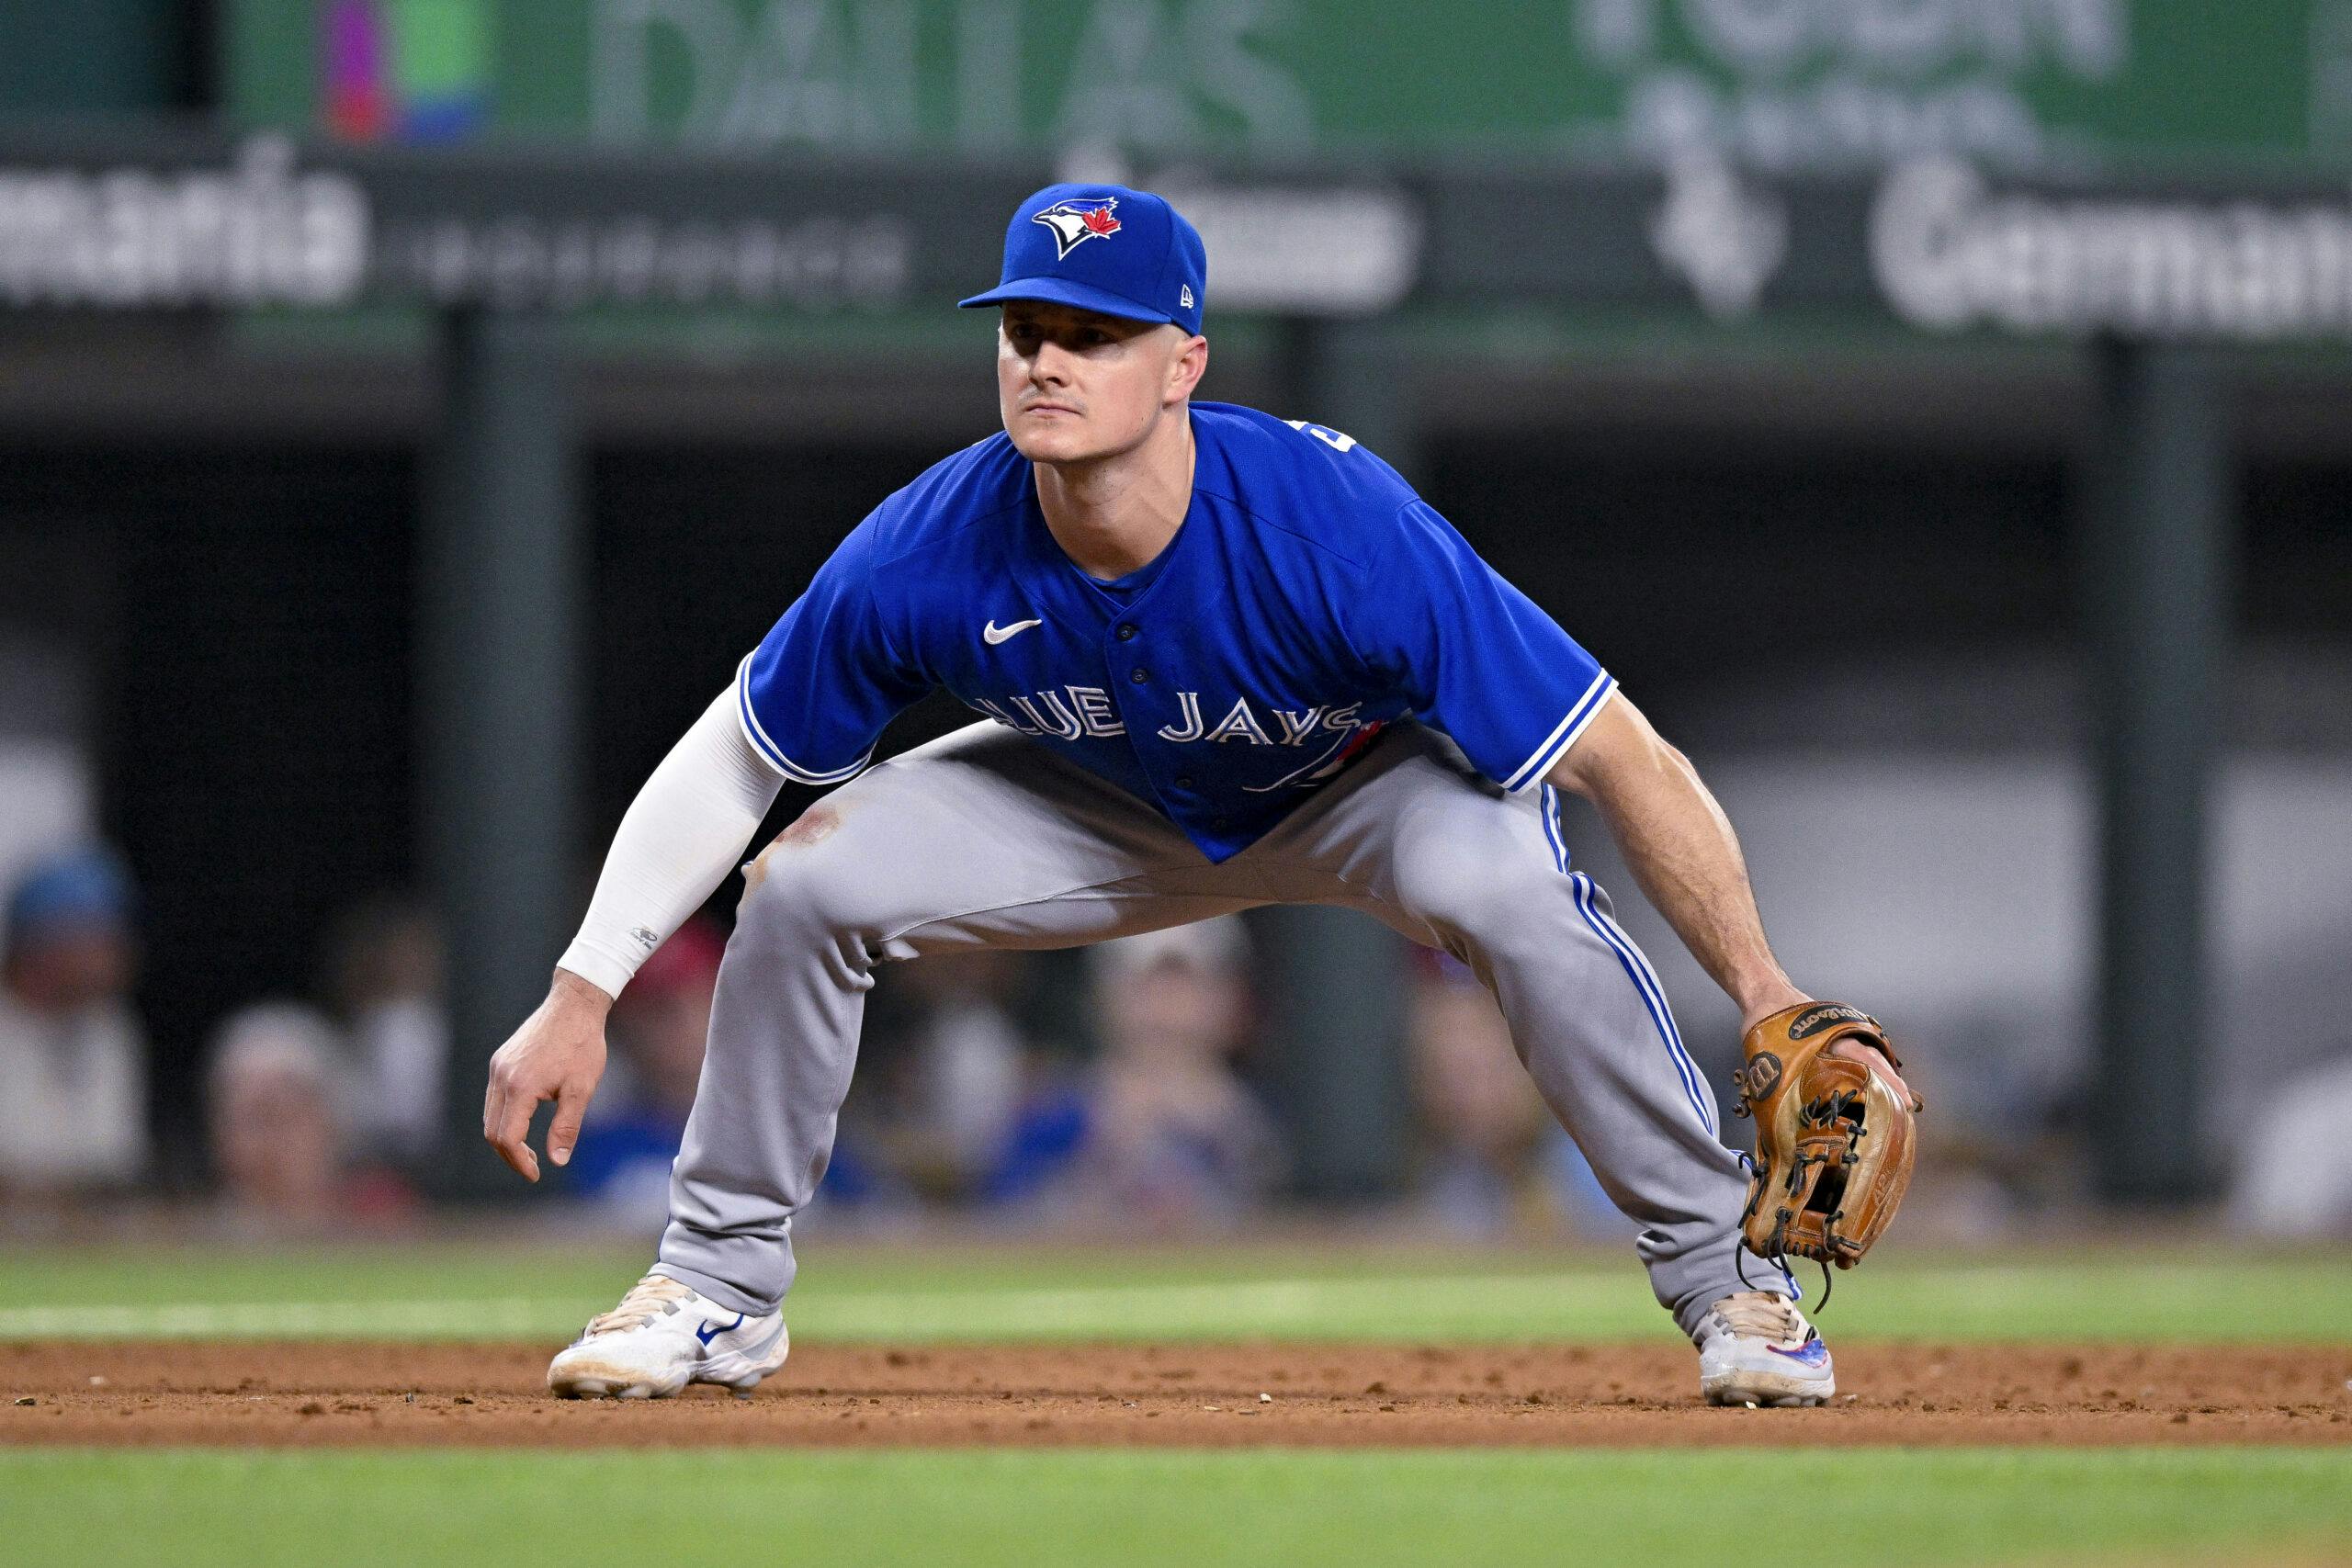 Blue Jays utility man Ernie Clement is the closest thing MLB has